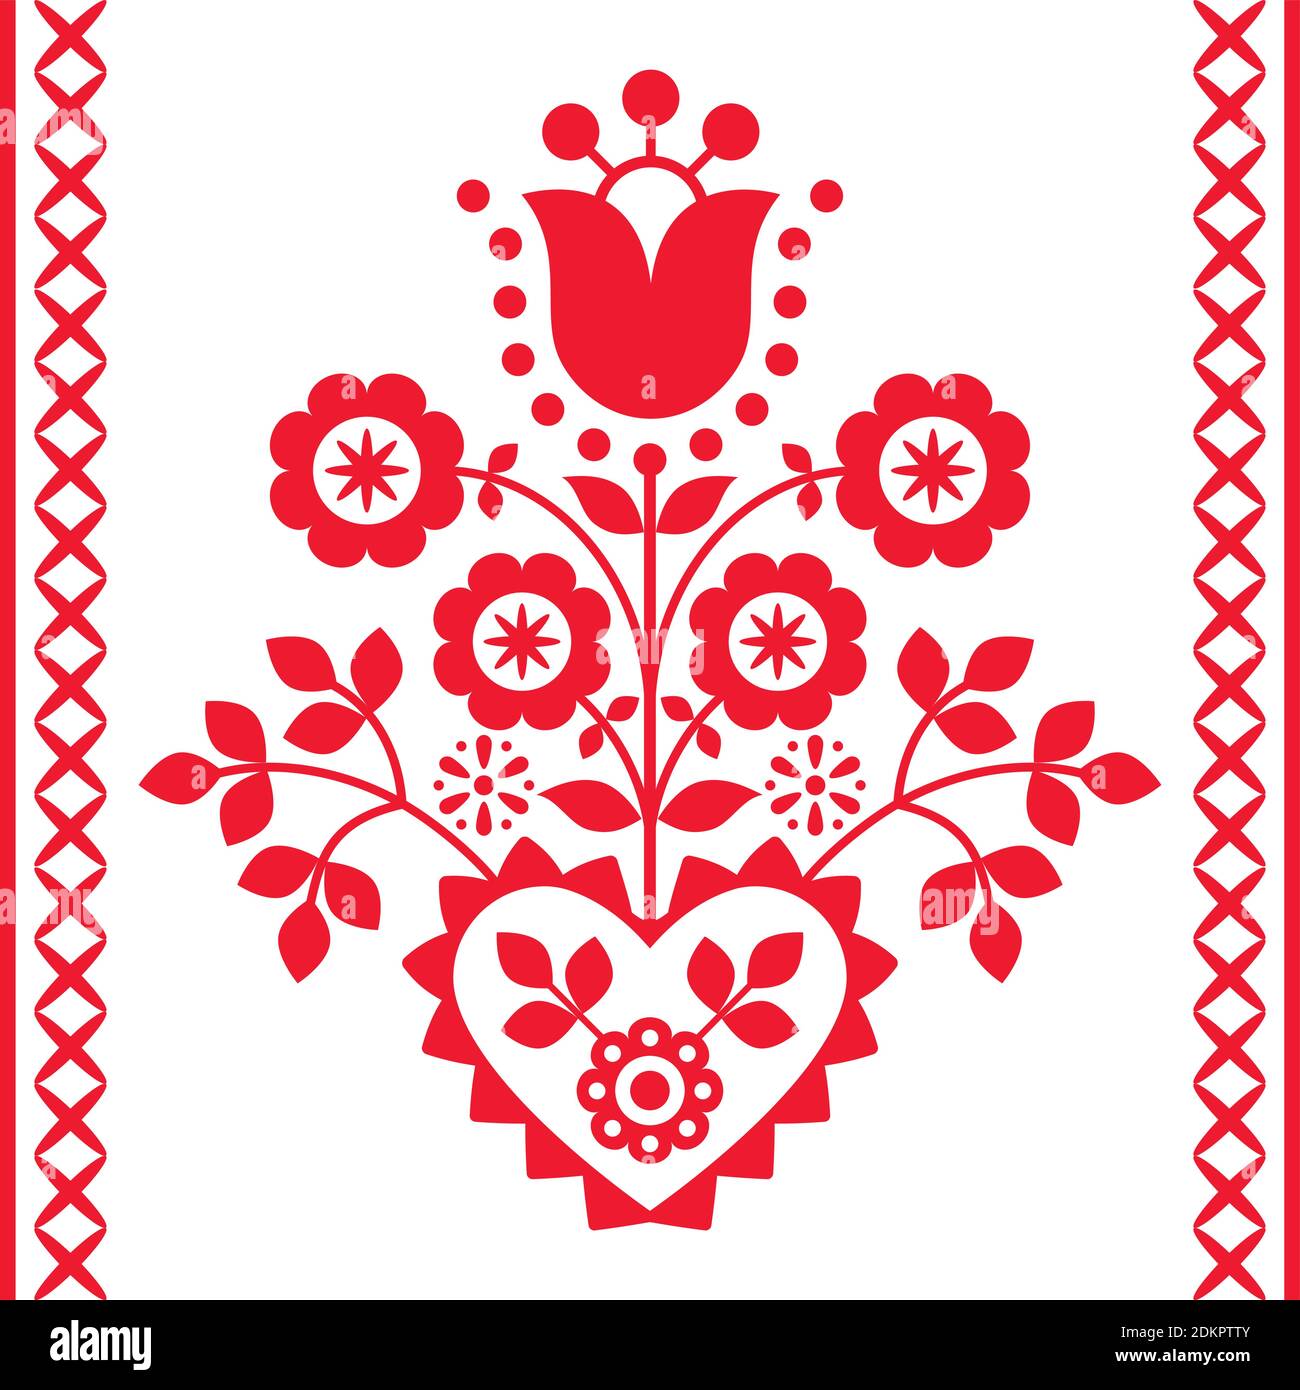 Polish Floral folk art vector design from Nowy Sacz in Poland inspired by traditional highlanders embroidery Lachy Sadeckie Stock Vector